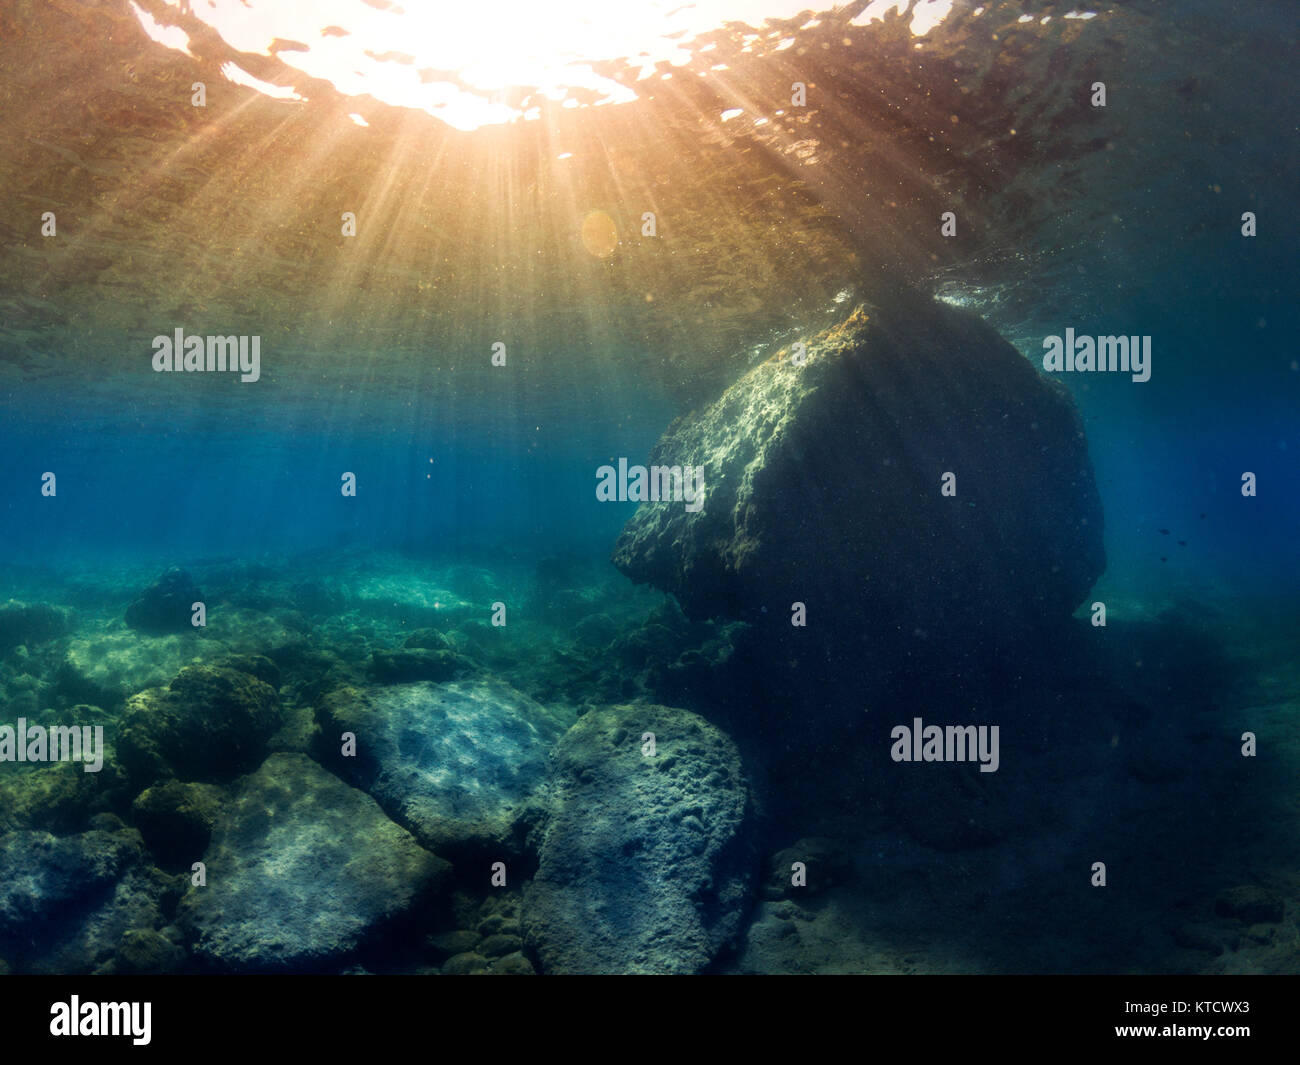 Underwater landscape and a big rock with sunlight rays. Stock Photo